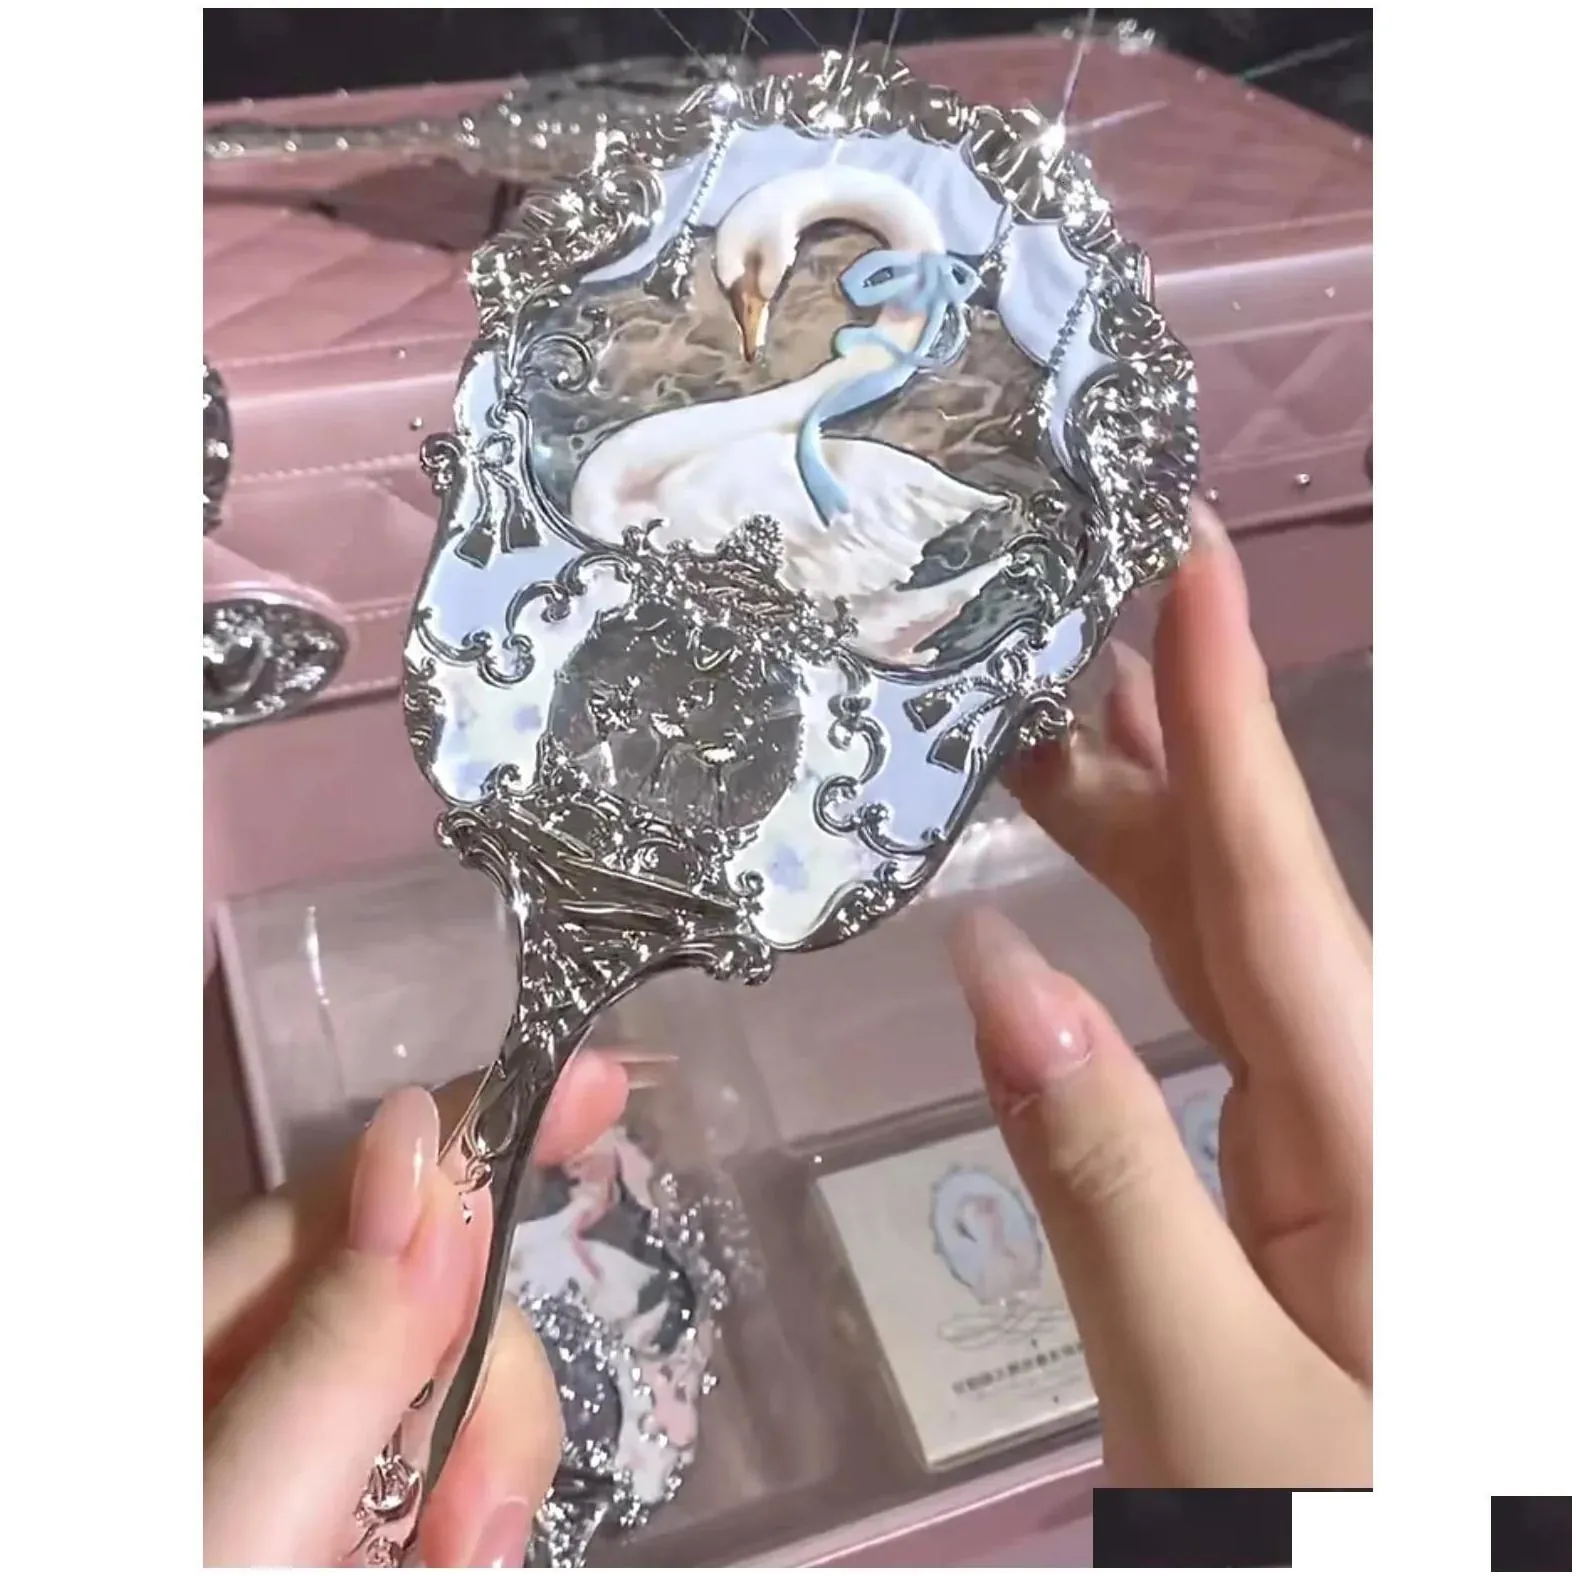 Compact Mirrors Flower Knows Mirror N Ballet Moonlight Mermaid Collection Handheld Limited White Blue Pink Chocolate Fairy 240108 Dr Dhghf